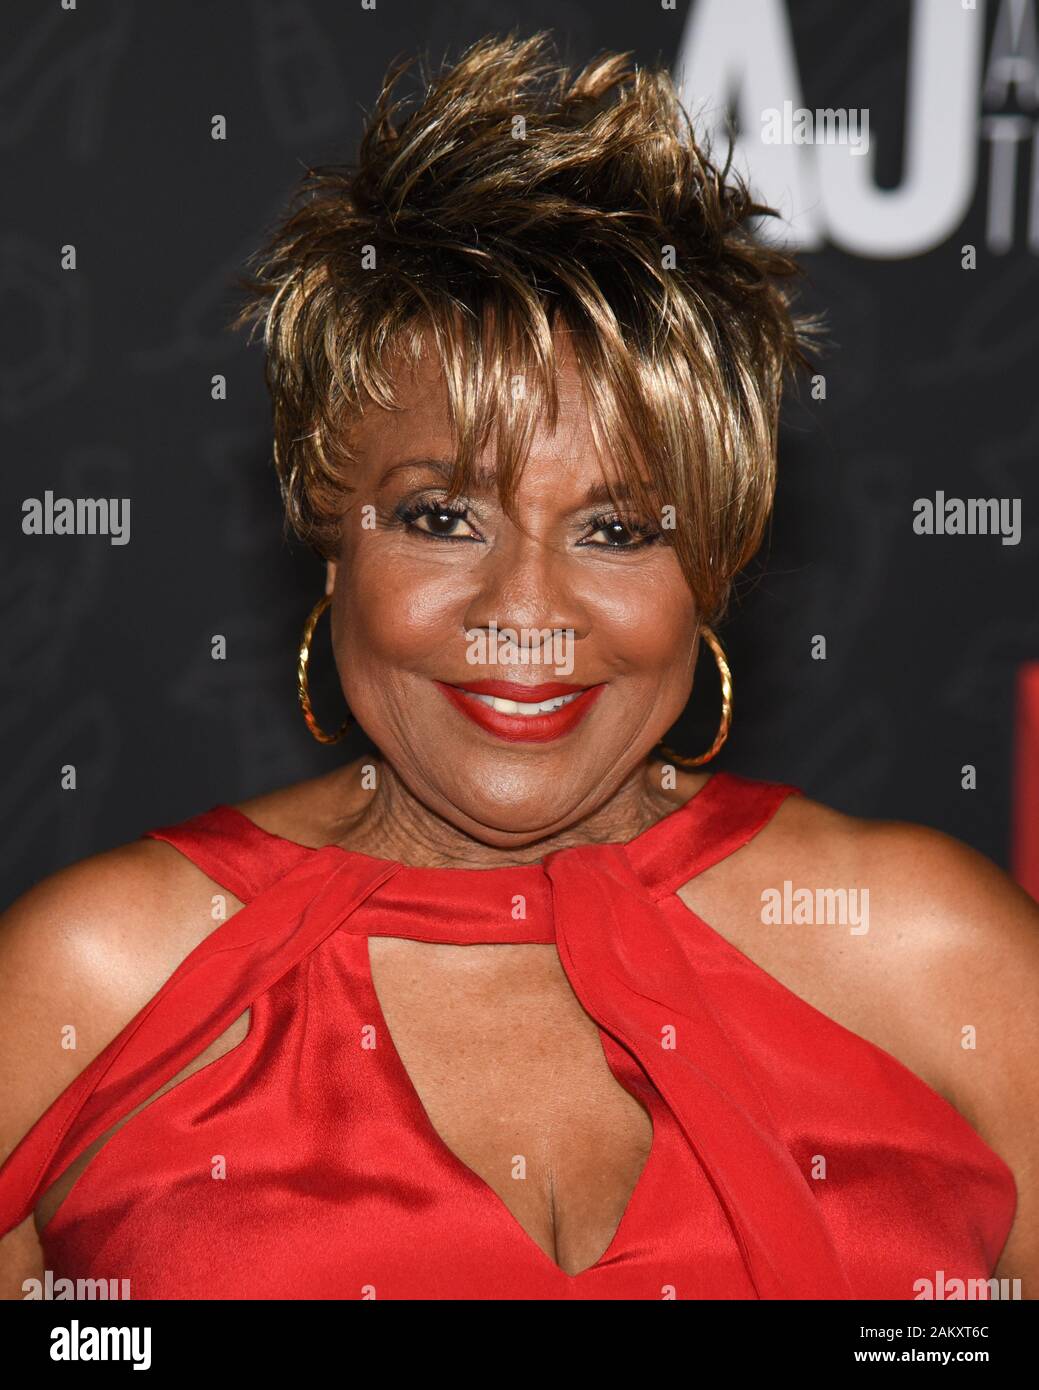 January 9, 2020, Hollywood, CA, USA: Thelma Houston attends Netflix's ''AJ And The Queen'' Season 1 Premiere at The Egyptian Theatre in Hollywood. (Credit Image: © Billy Bennight/ZUMA Wire) Stock Photo